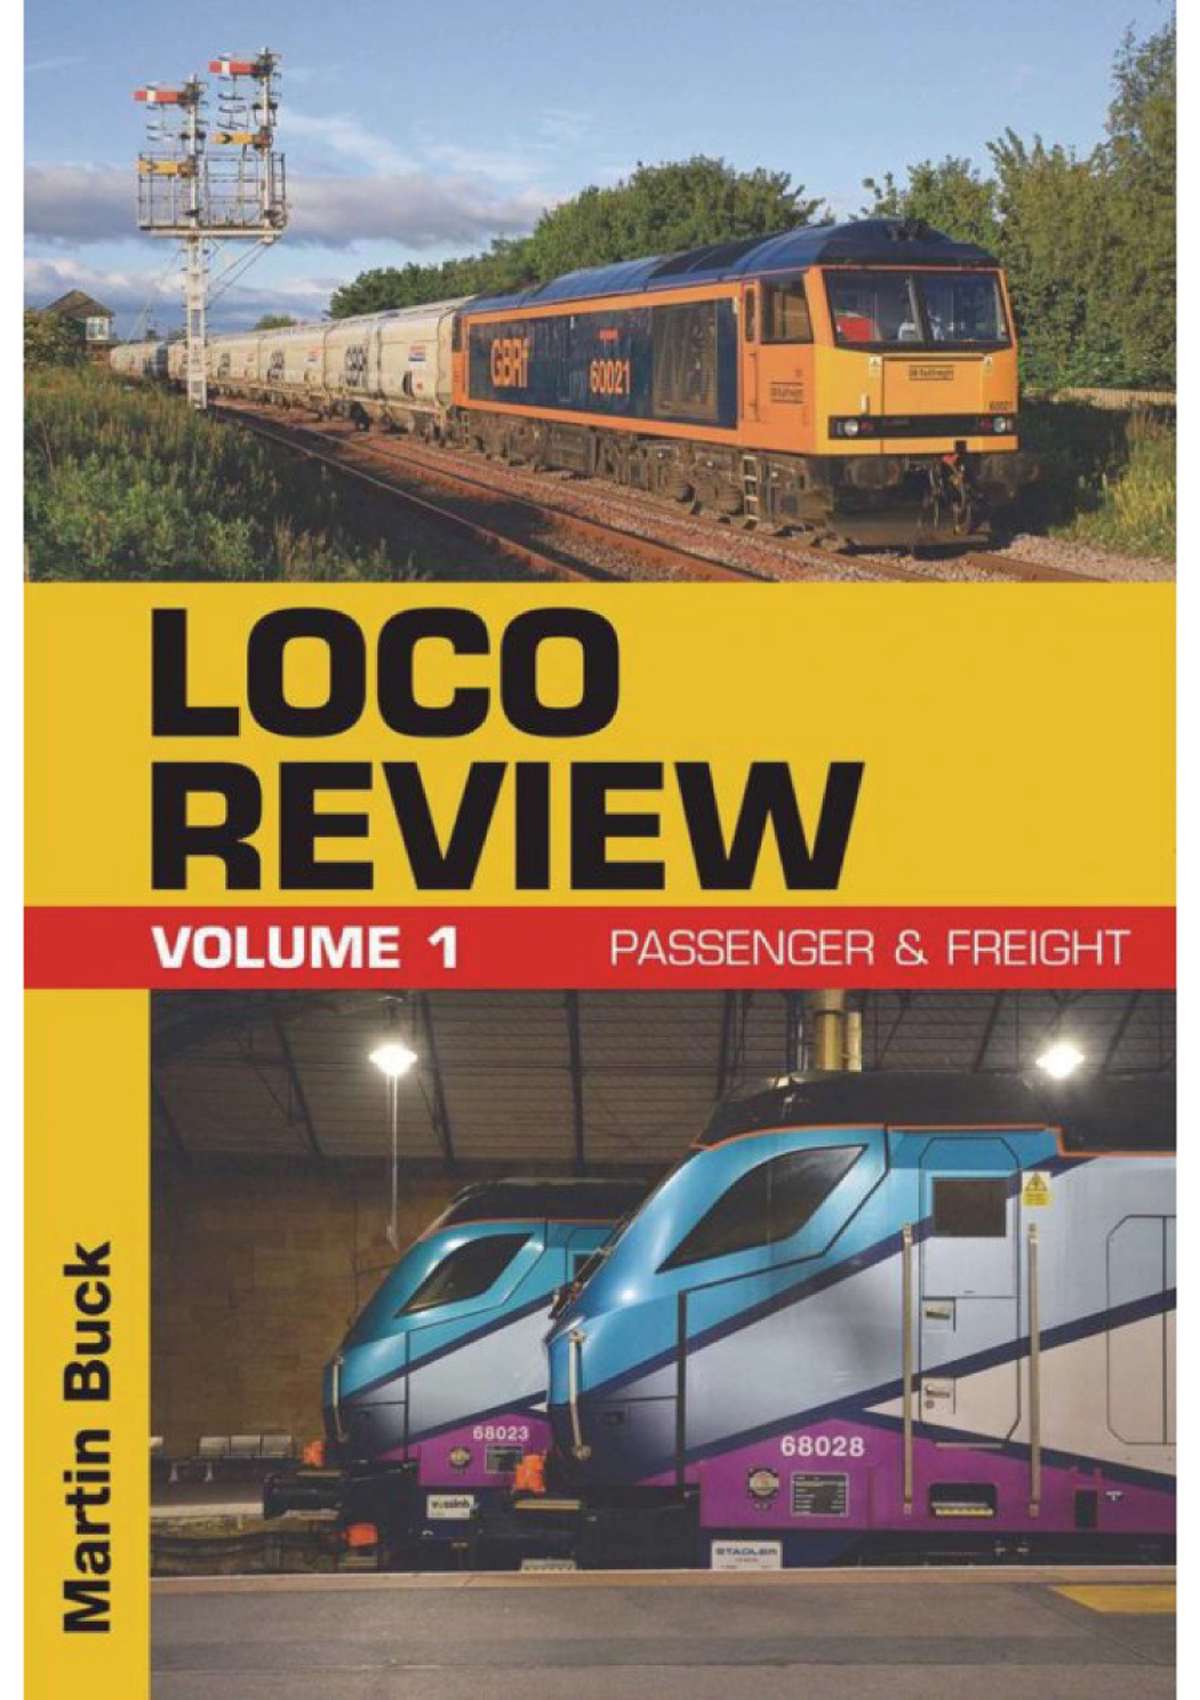 2960 - LOCO REVIEW Volume 1 - Passenger & Freight